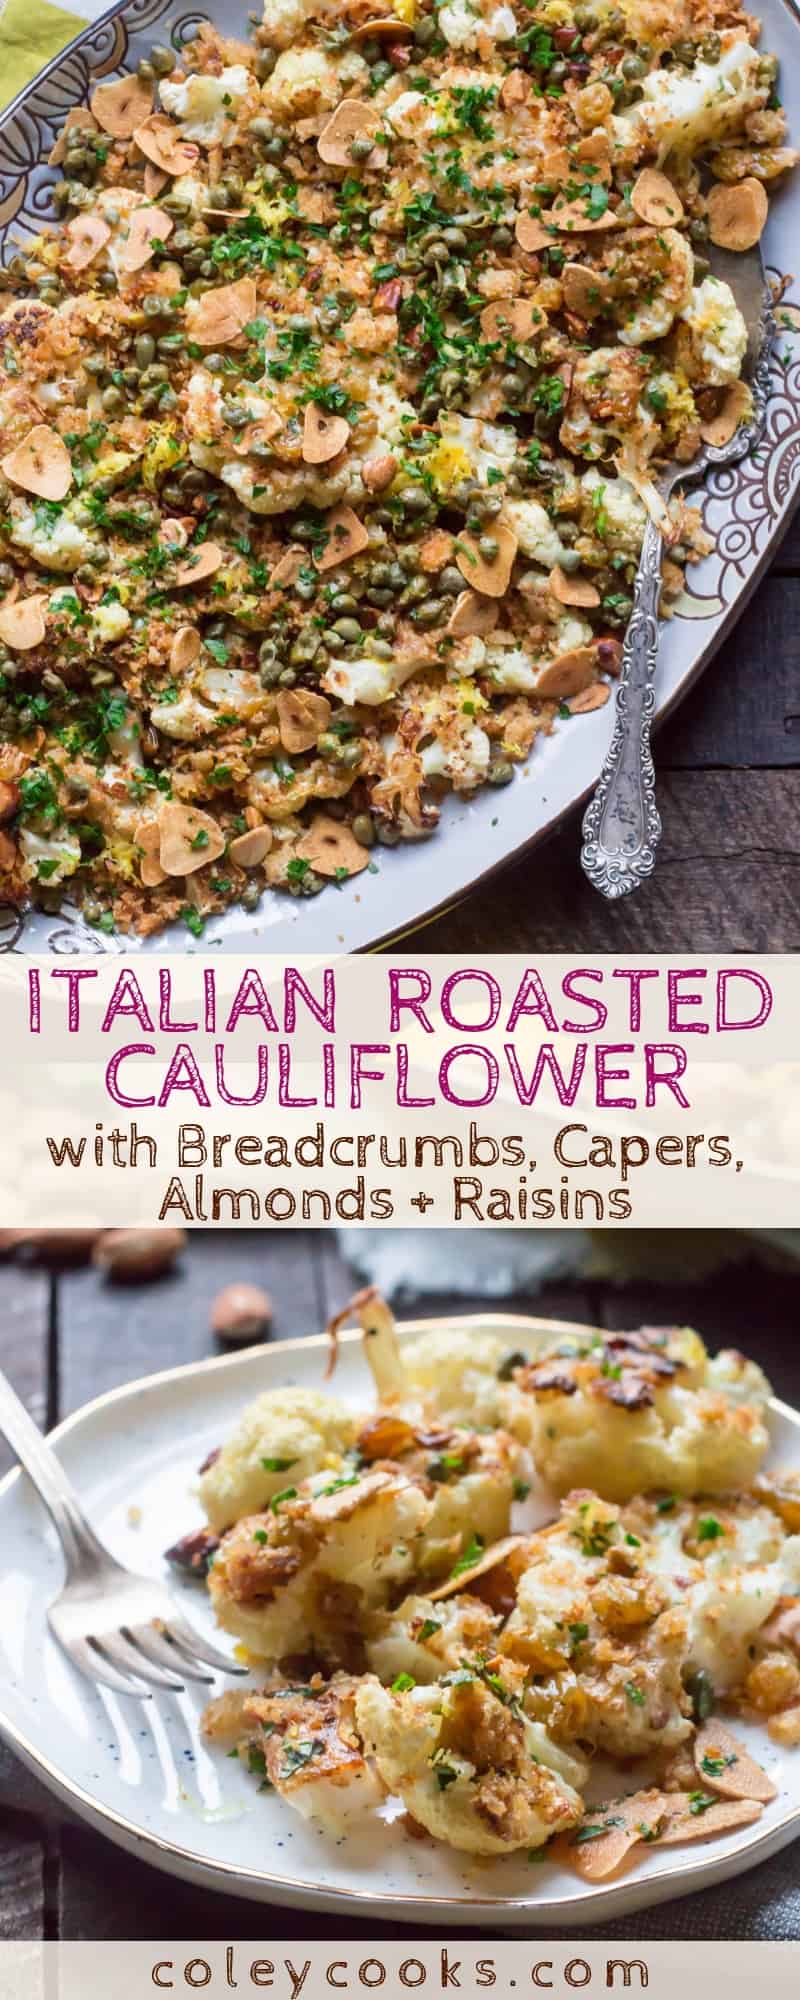 Italian Roasted Cauliflower with Breadcrumbs, Capers, Almonds + Raisins | Delicious cauliflower recipe with tons of texture and flavor perfect for a Thanksgiving side! #thanksgiving #recipe #side #cauliflower #easy #Italian #healthy | ColeyCooks.com